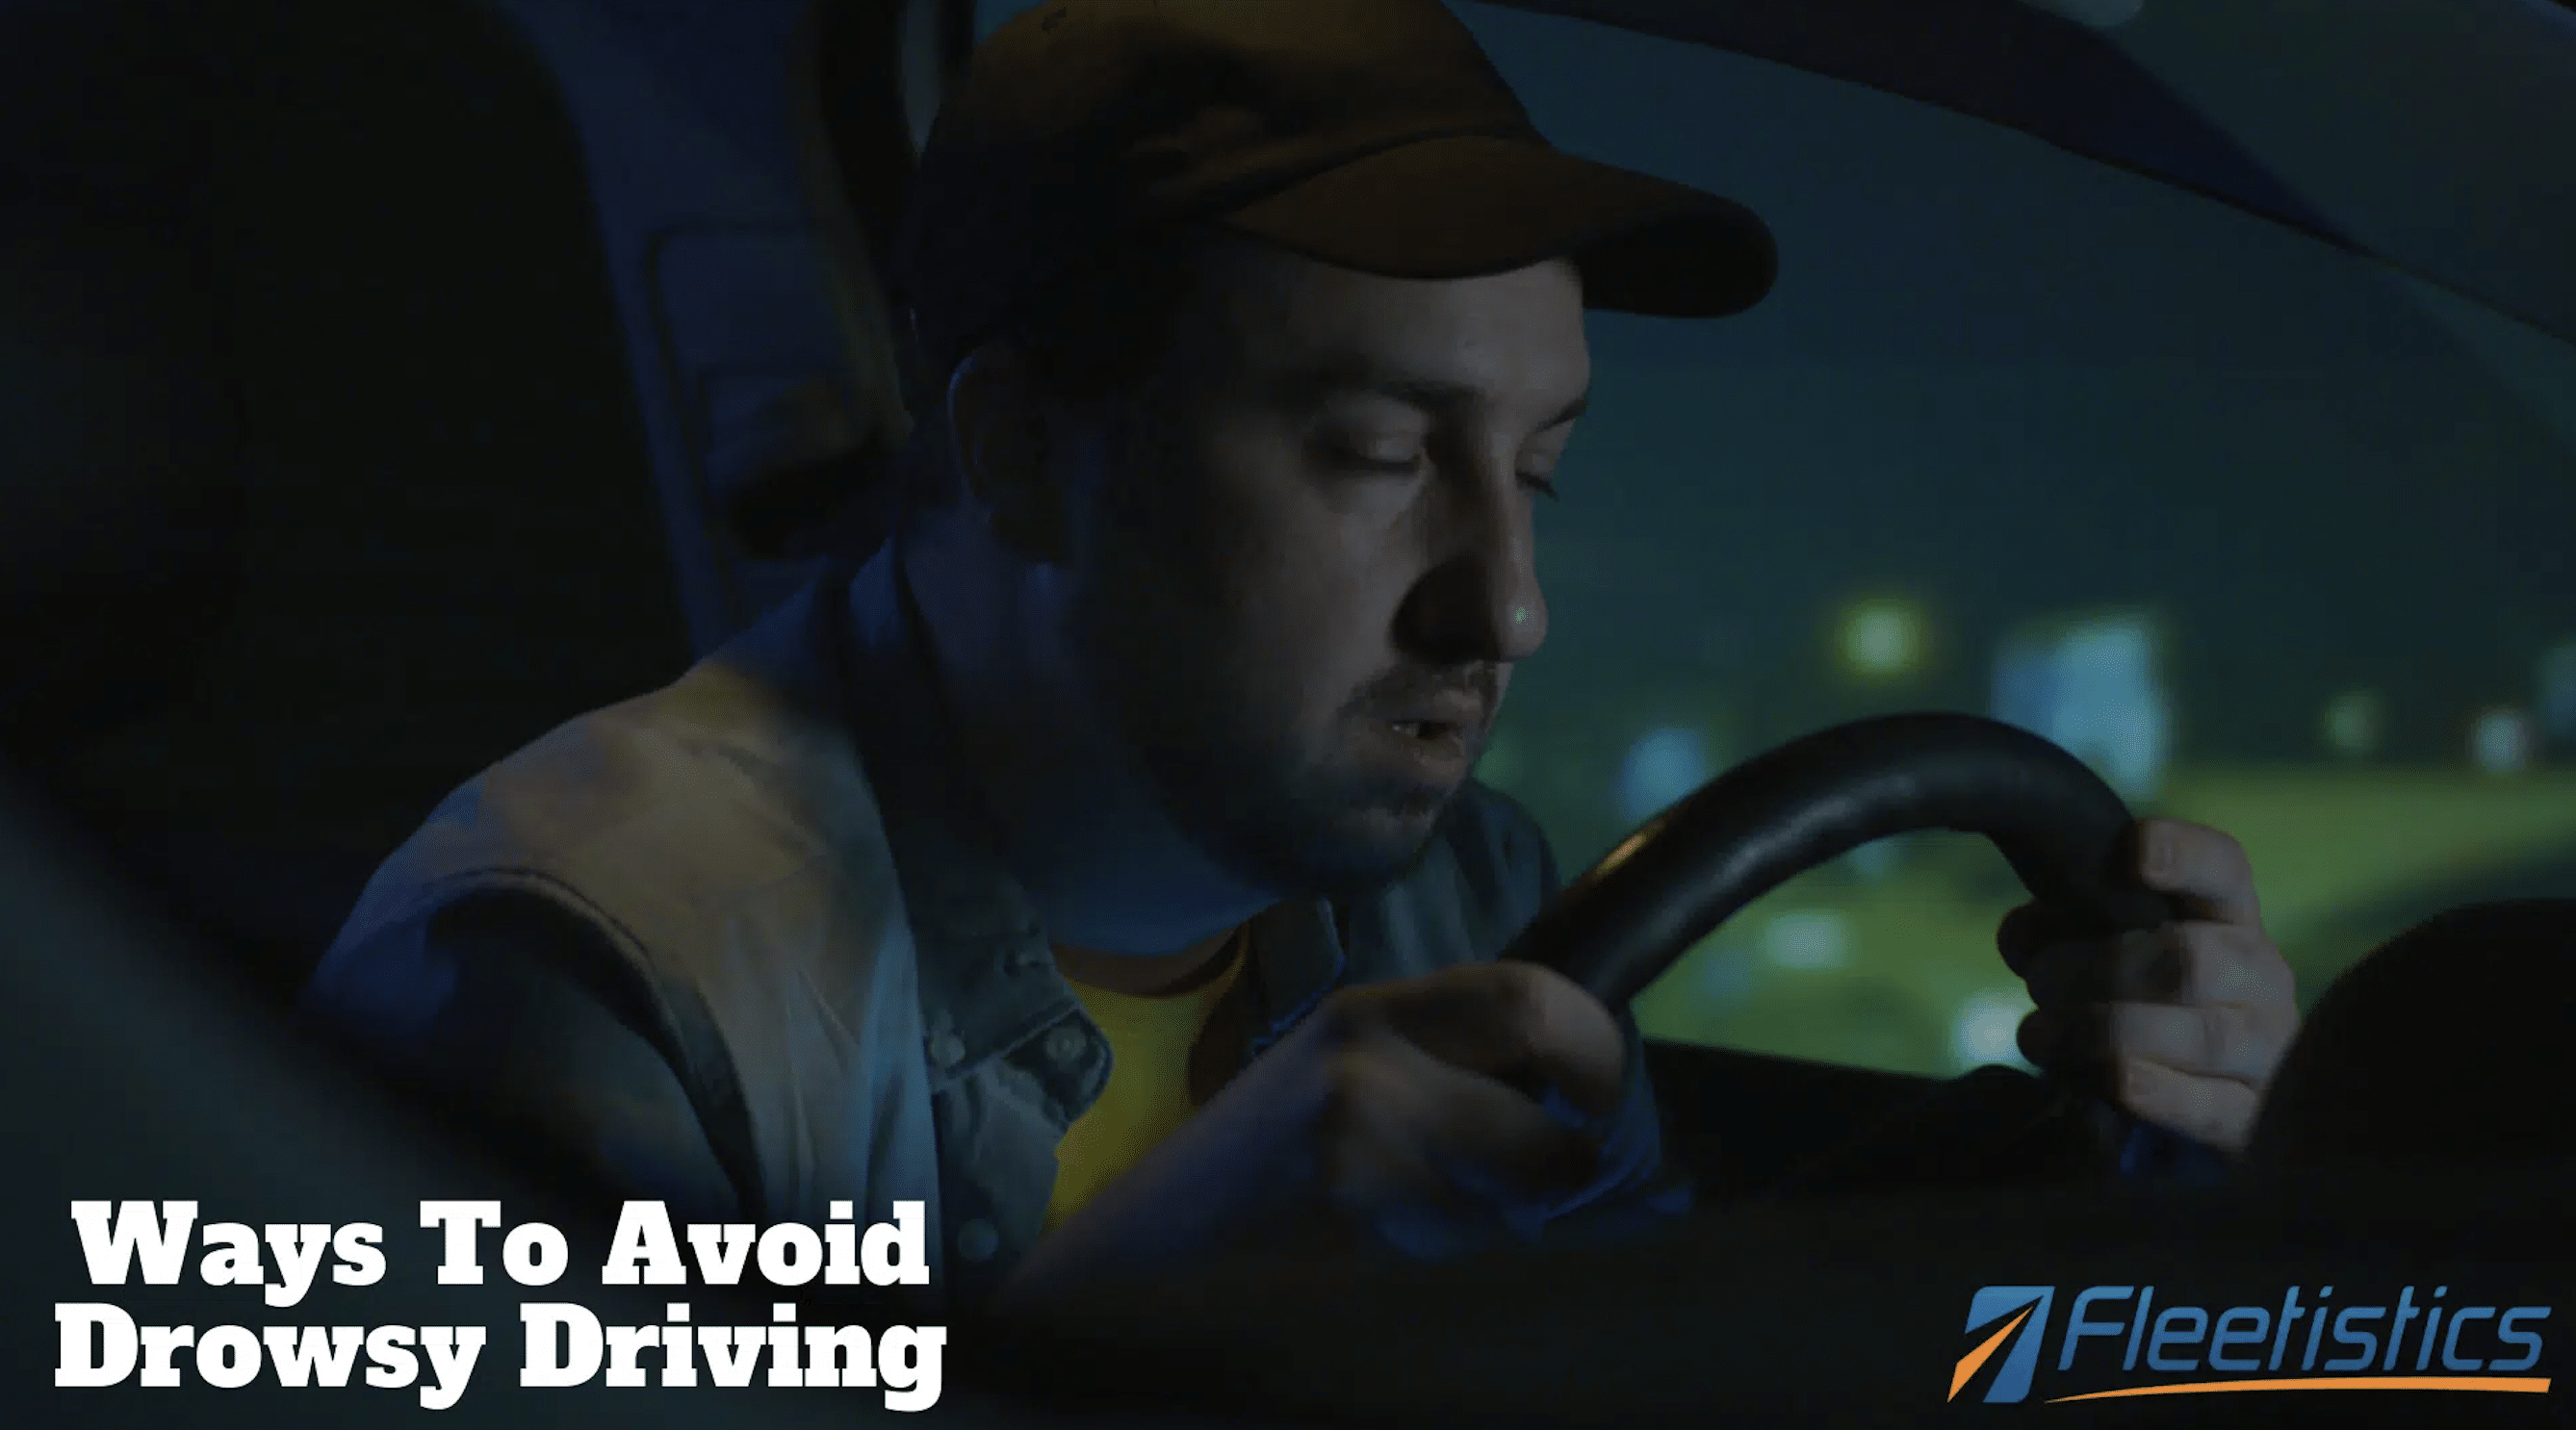 Getting Drowsy While Driving